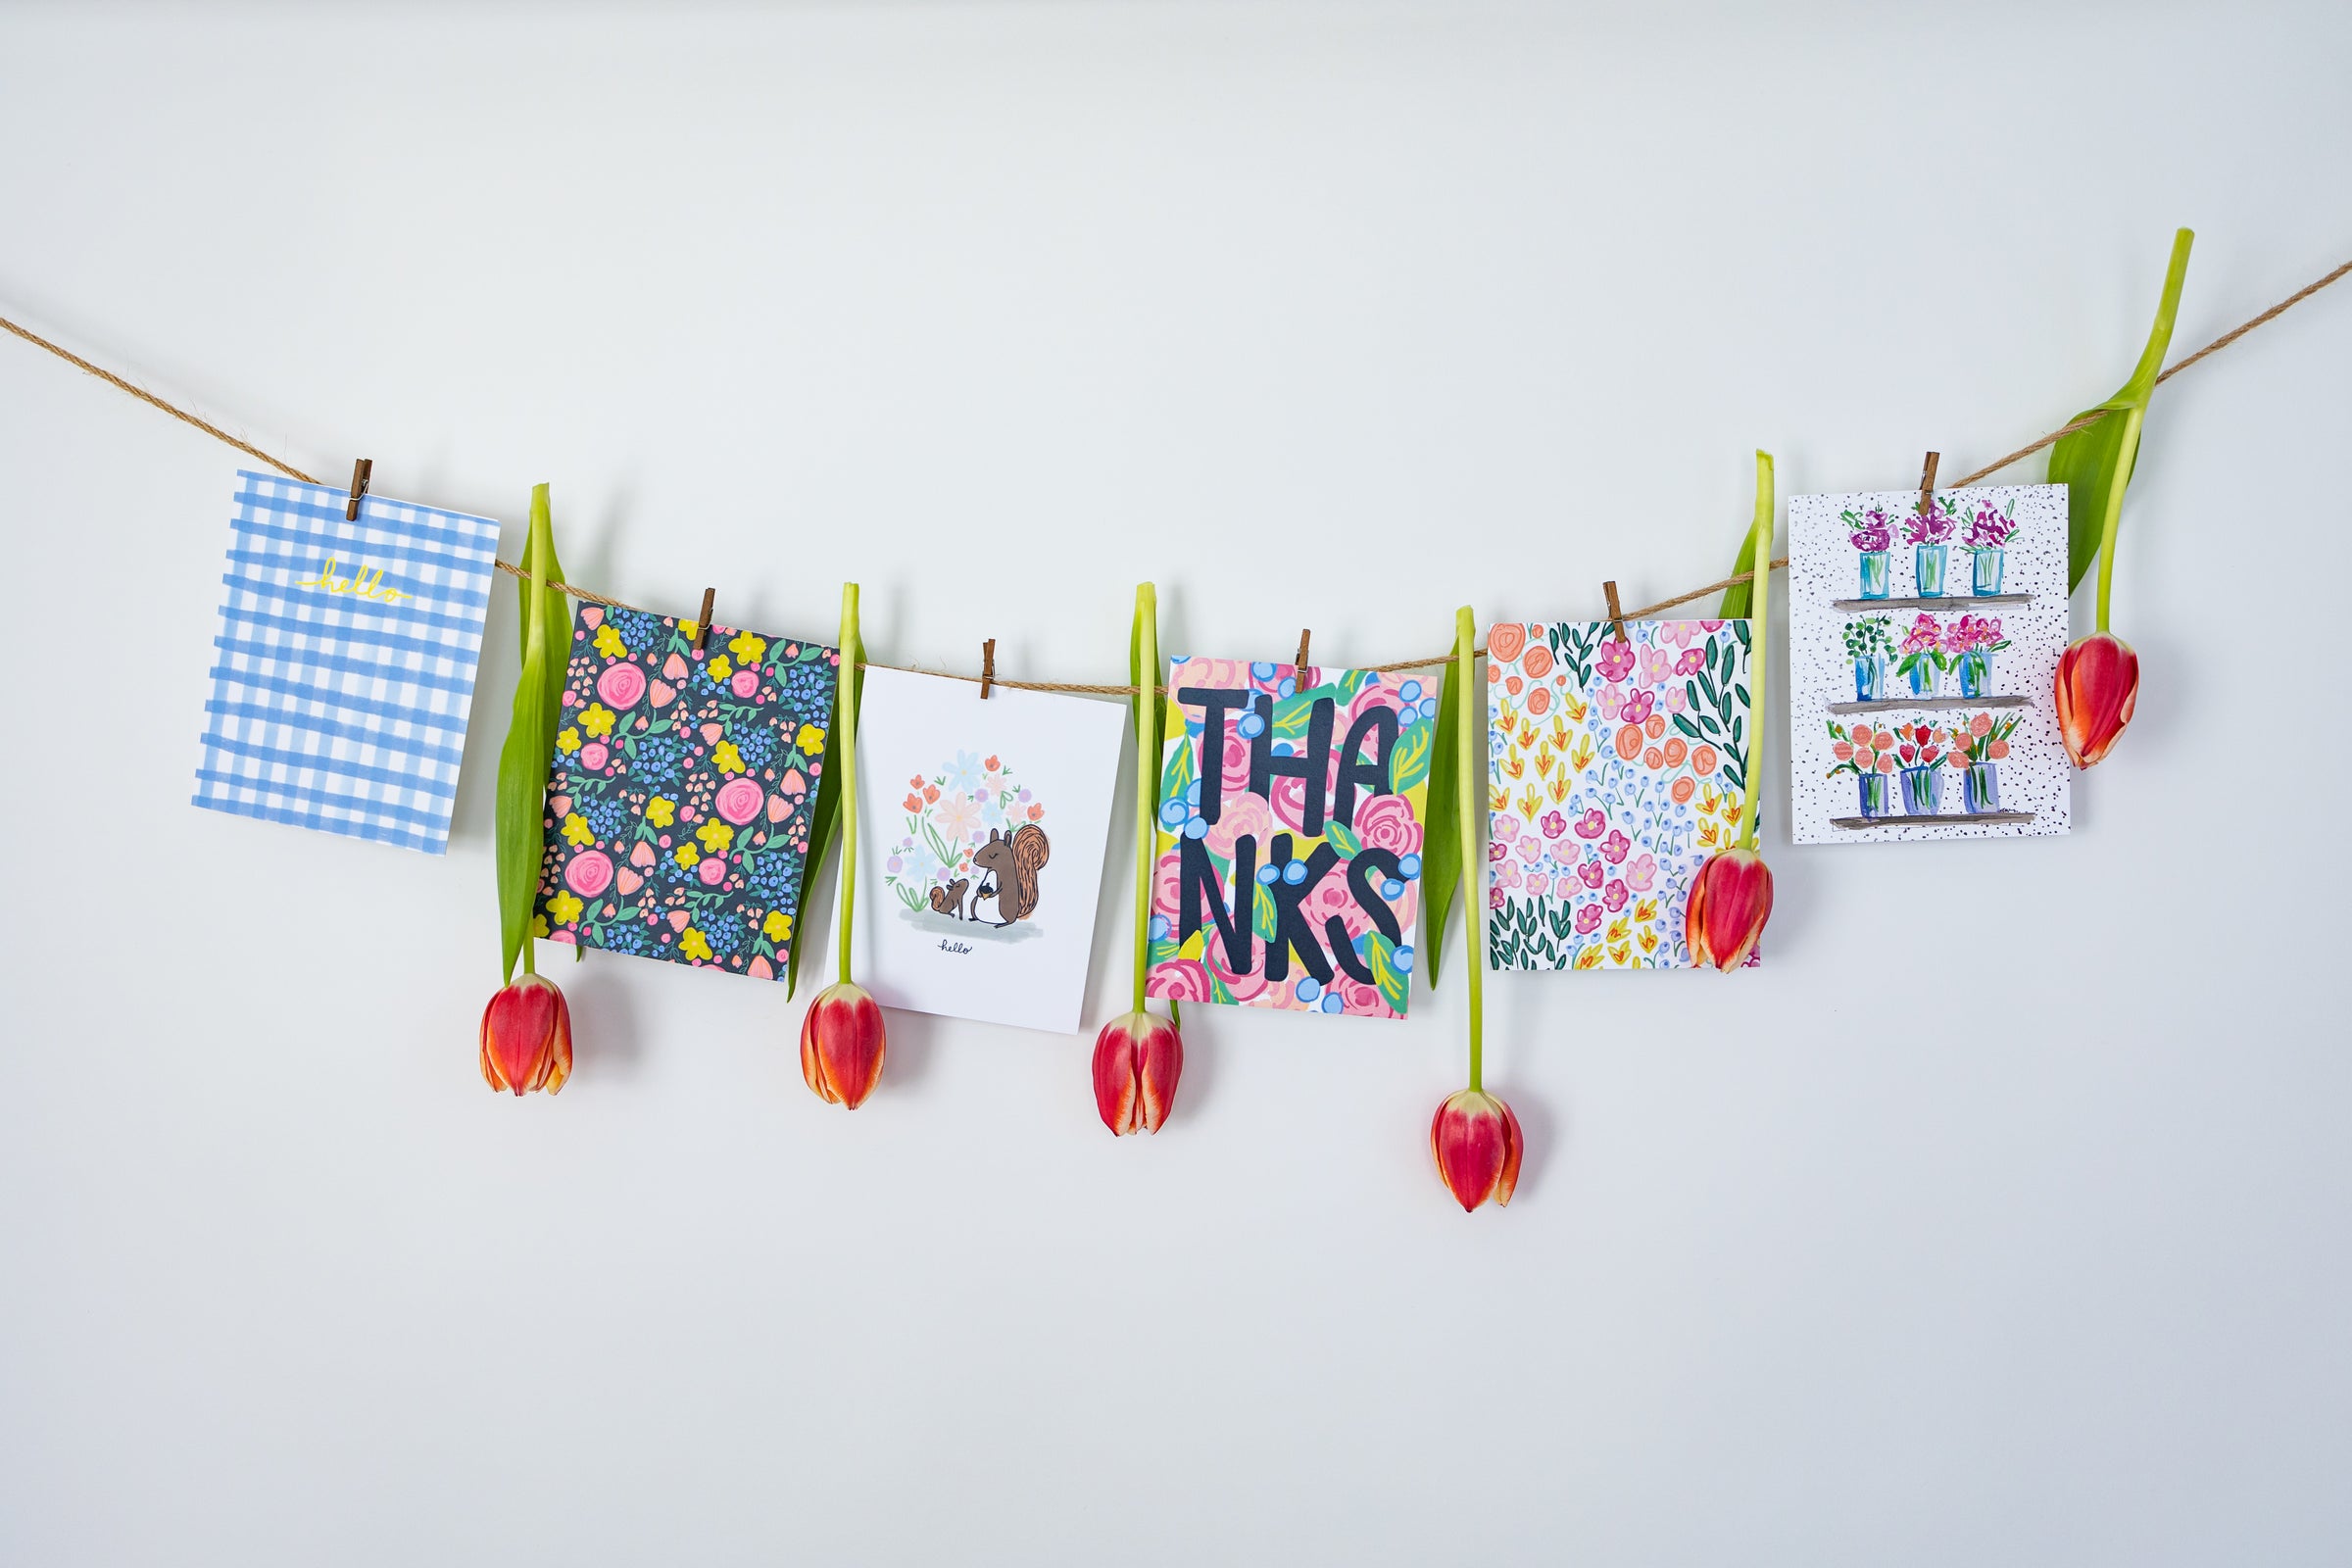 A visually captivating image showcases a vibrant collection of greeting cards gracefully suspended on a line of twine. The colorful cards, each uniquely designed, sway gently in the breeze, adding a playful and cheerful atmosphere. 